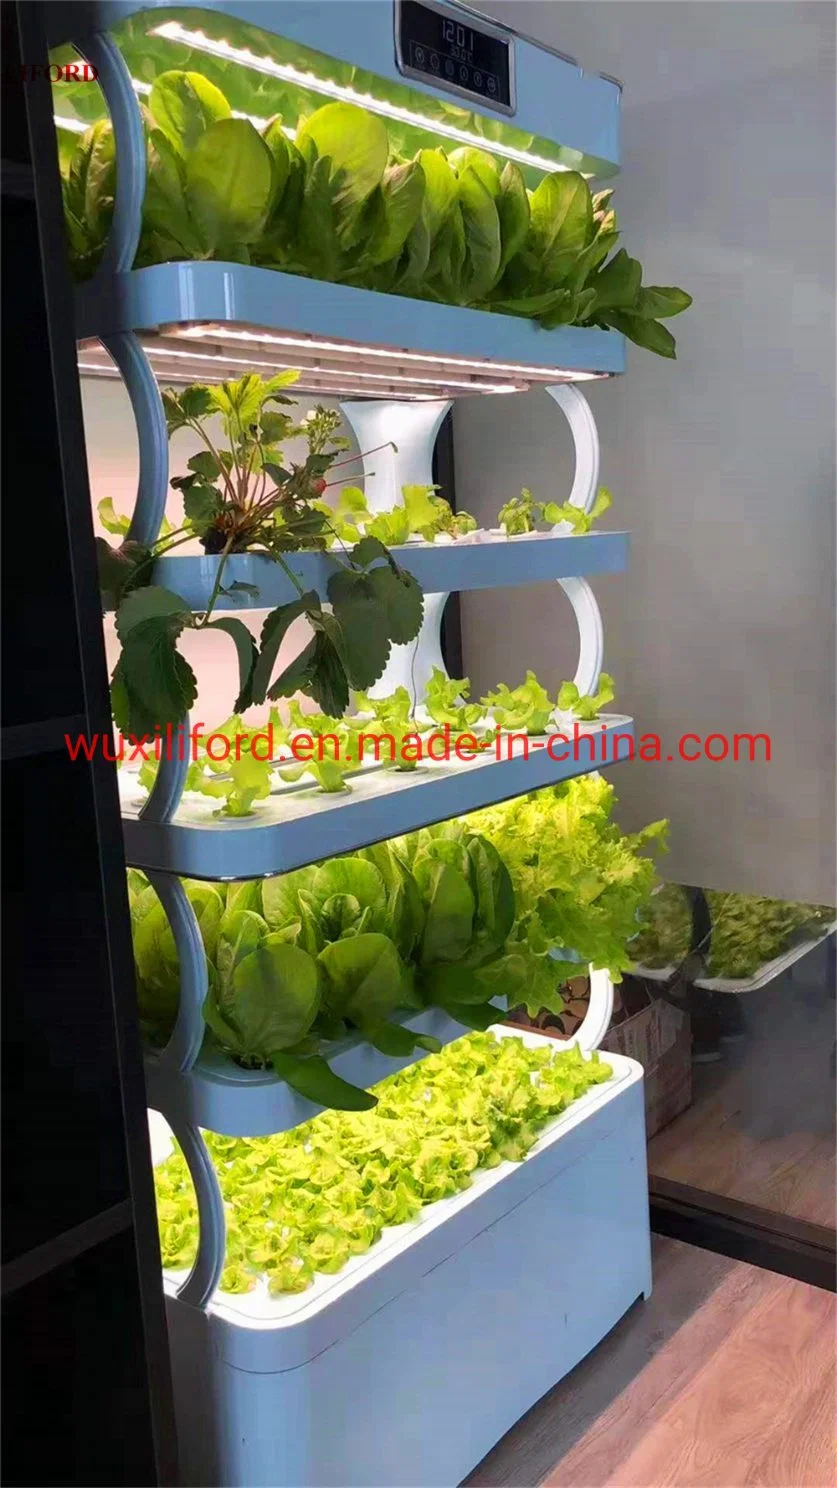 Automated Hydroponics System Smart Nft Hydroponic Growing System with Dimmable LED Grow Light